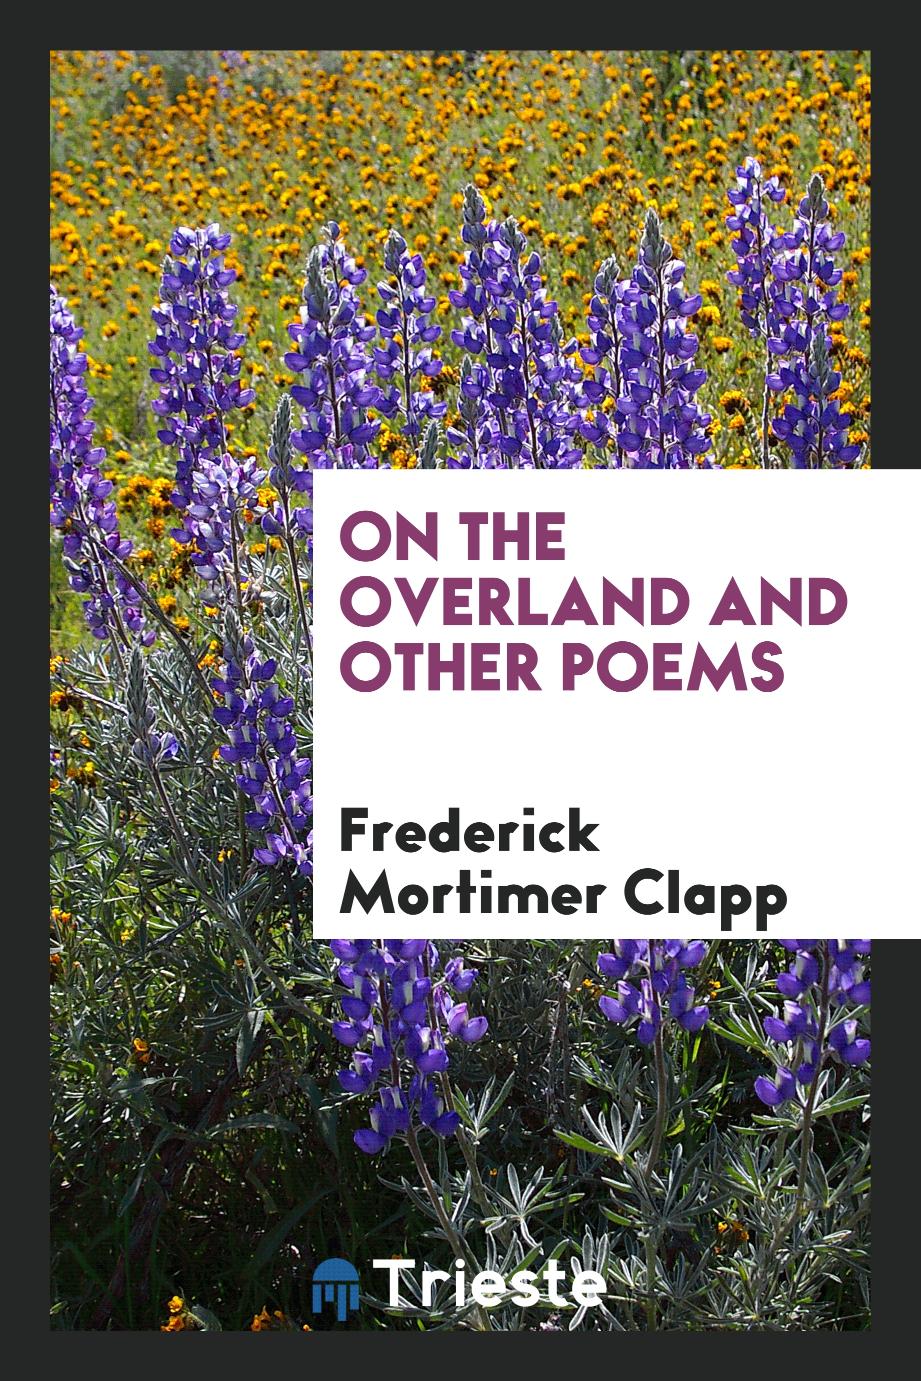 On the Overland and Other Poems